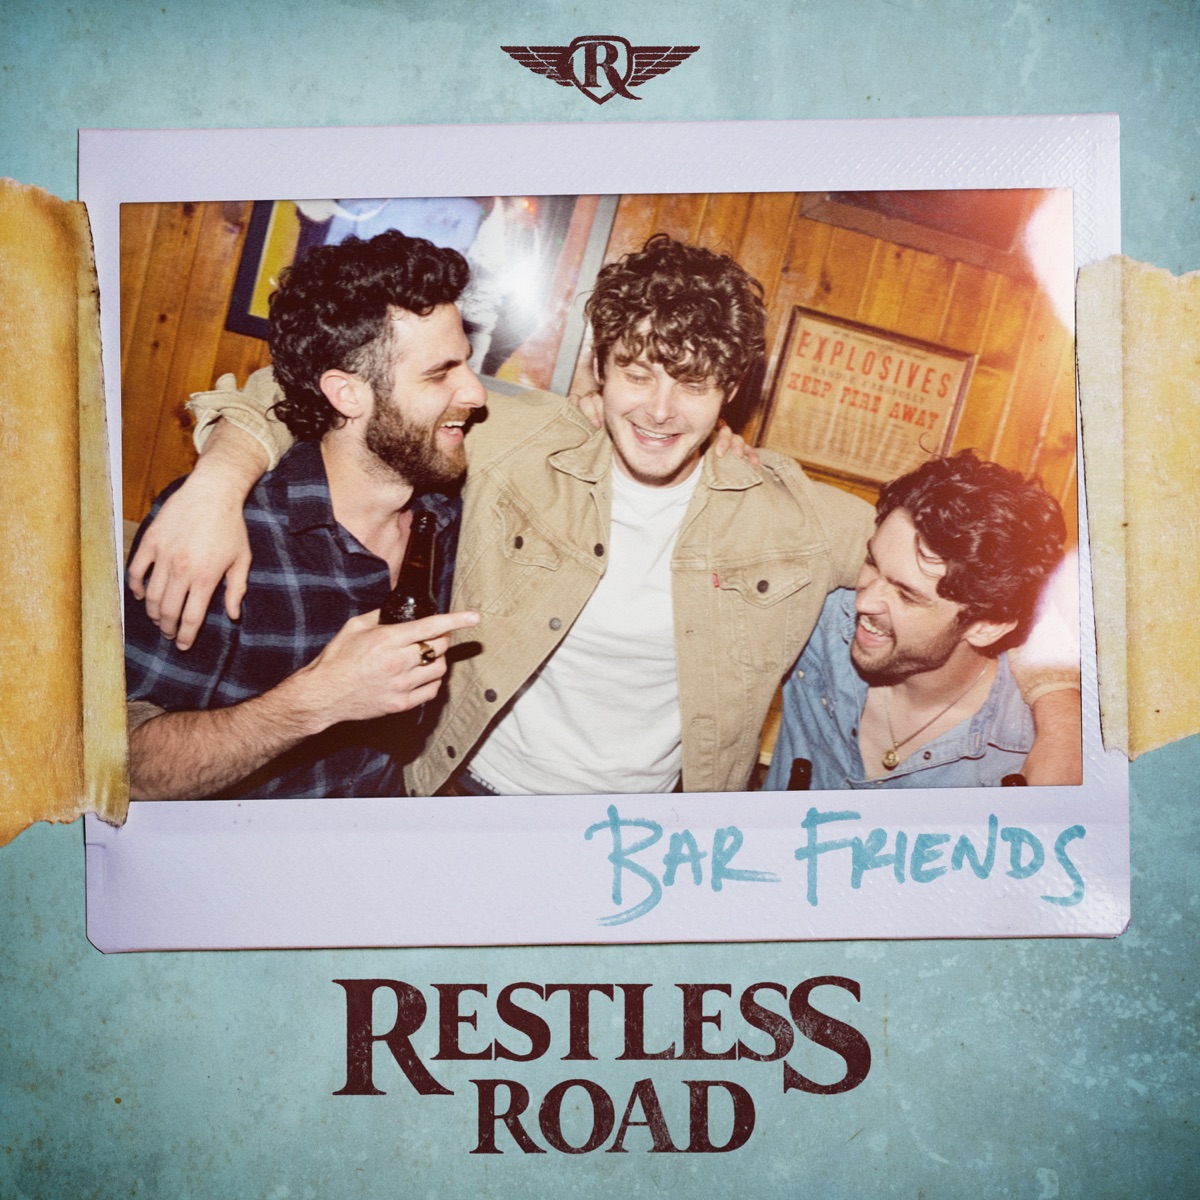 Growing Old With You (tradução) - Restless Road - VAGALUME